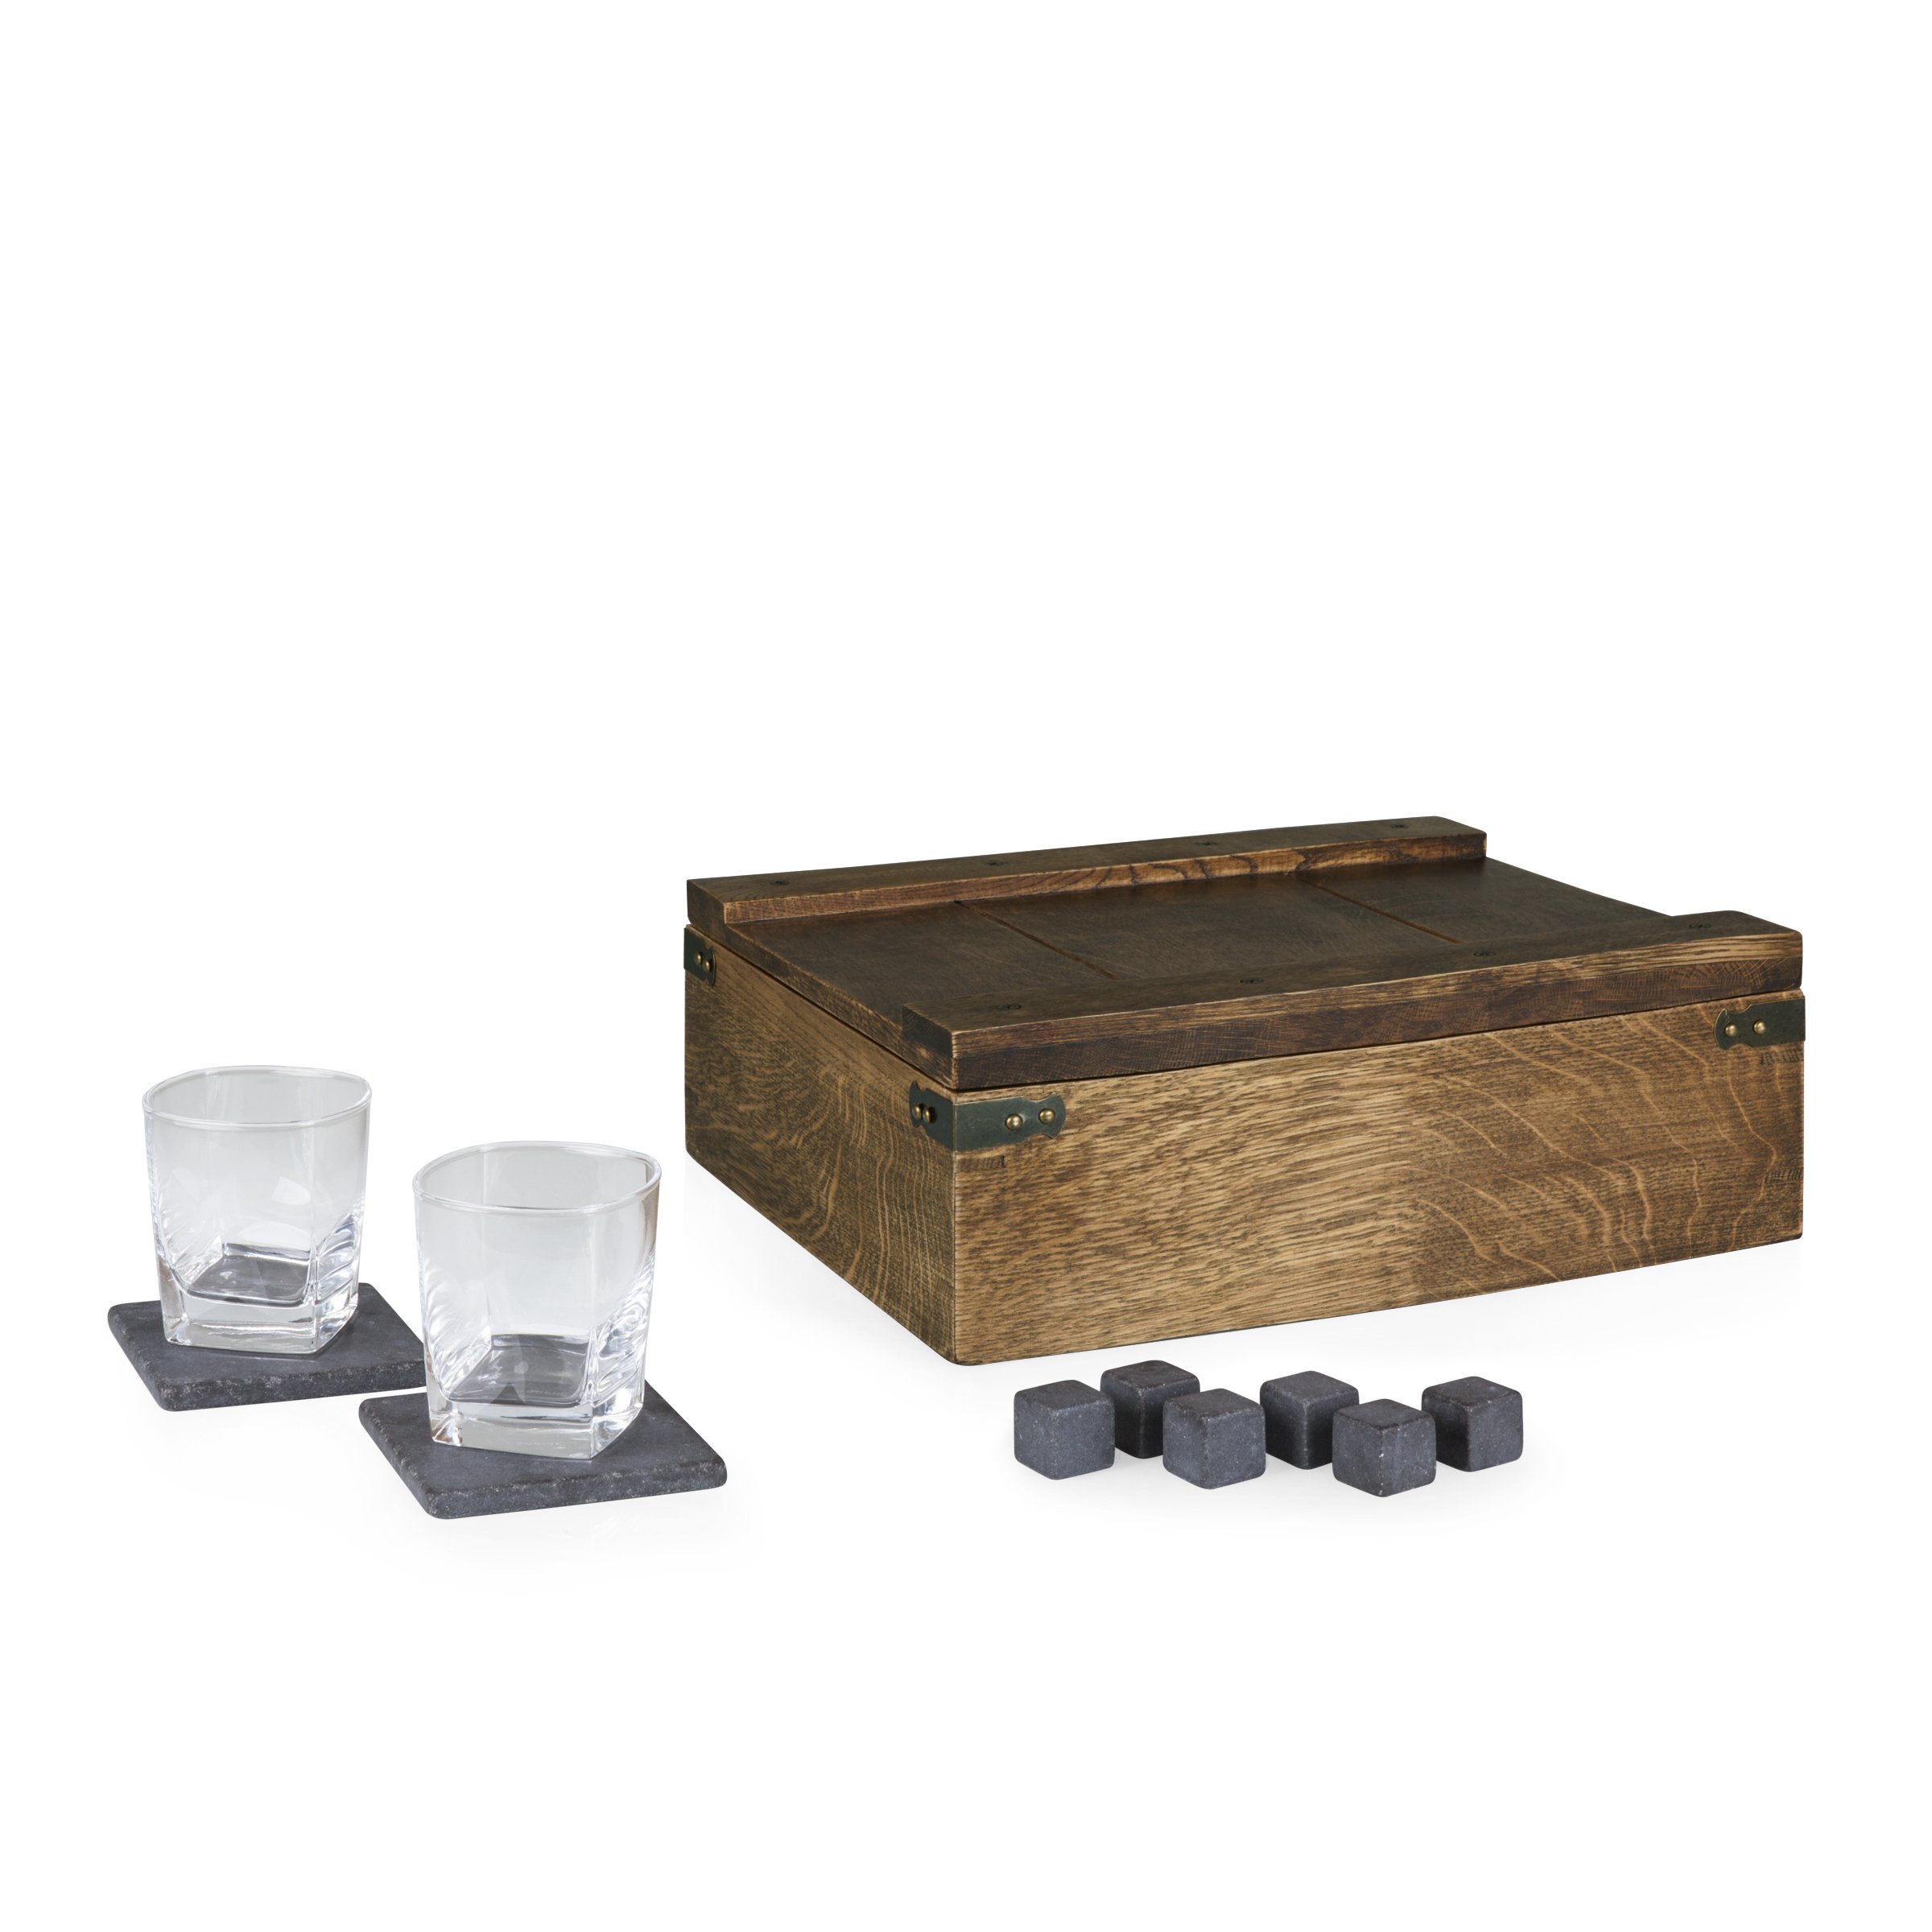 LEGACY - a Picnic Time brand - Whiskey Box Gift Set, Whiskey Glasses Set of 2, Whiskey Stones Gift Set, (Oak Wood)